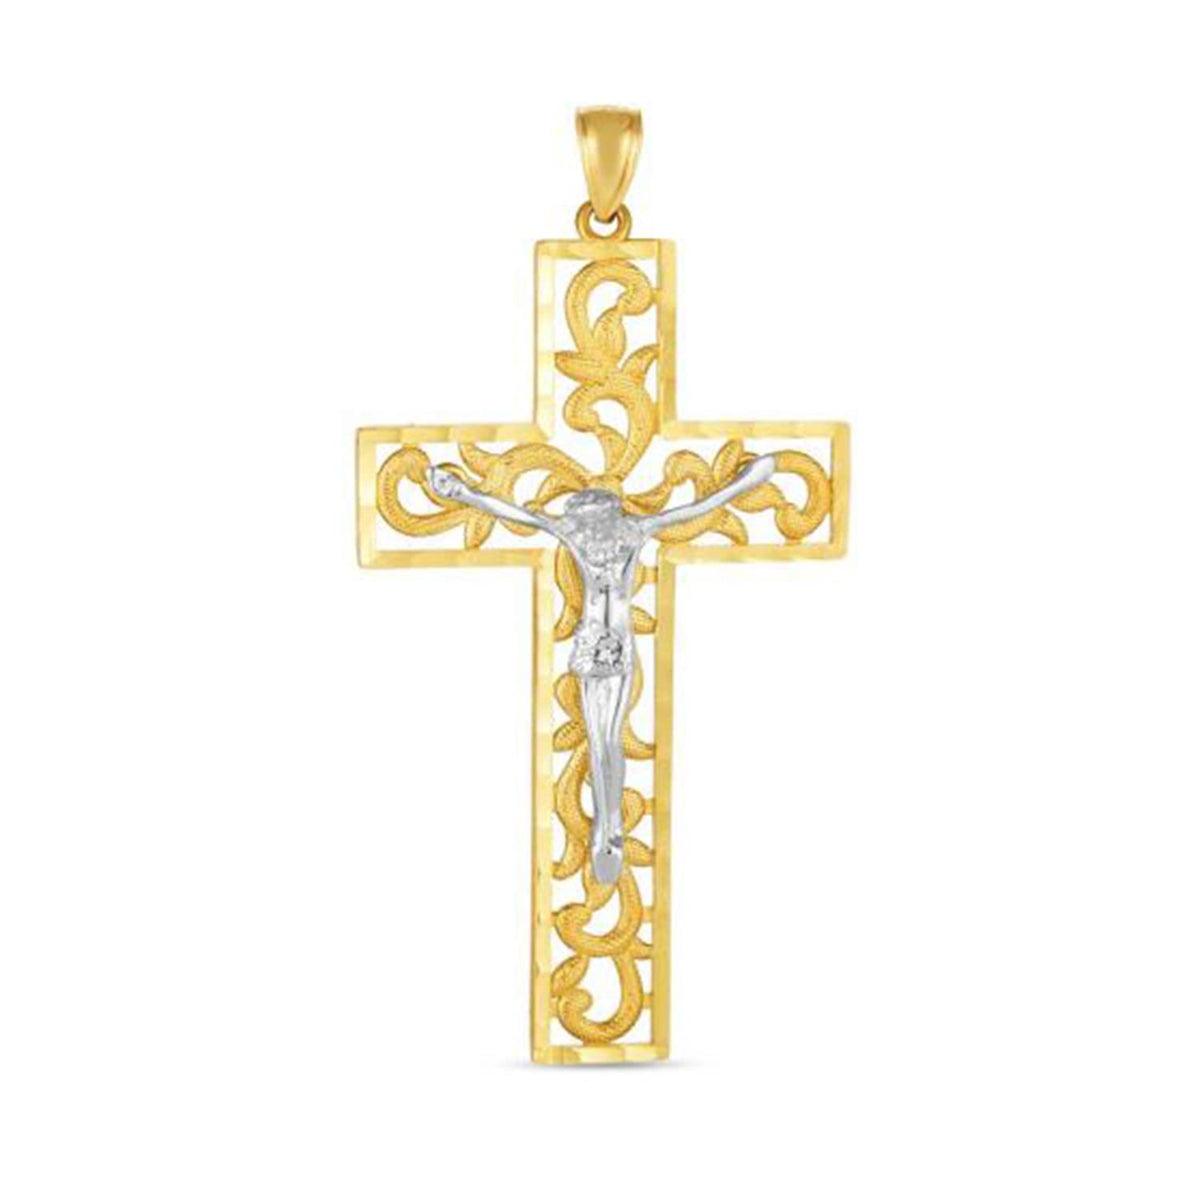 14K Yellow And White Gold Jesus Cross Charm Pendant fine designer jewelry for men and women